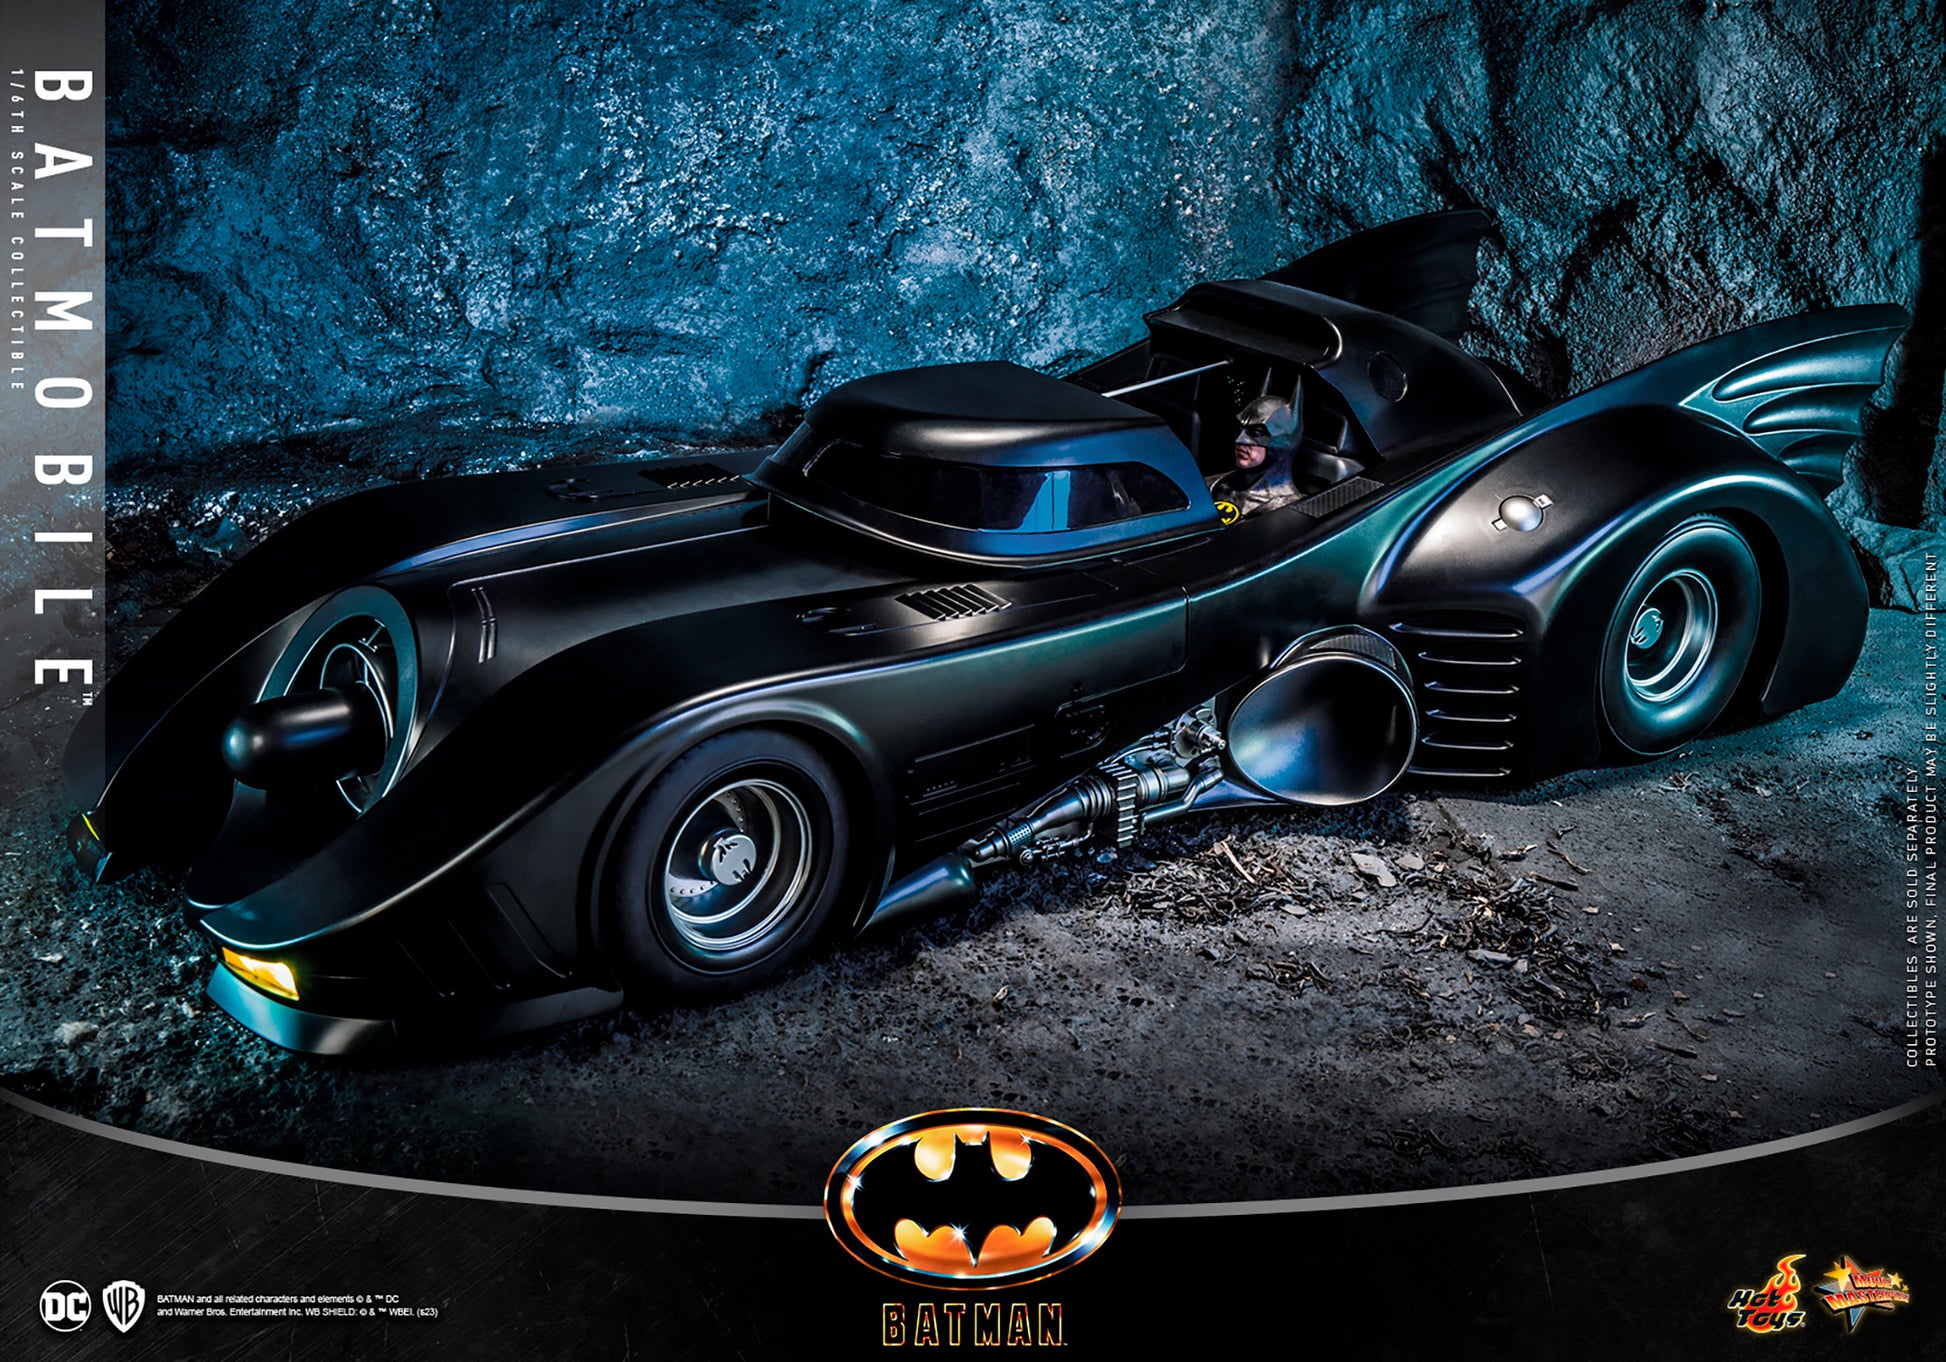 1989 Batmobile Sixth Scale Figure Accessory by Hot Toys – Alter Ego Comics